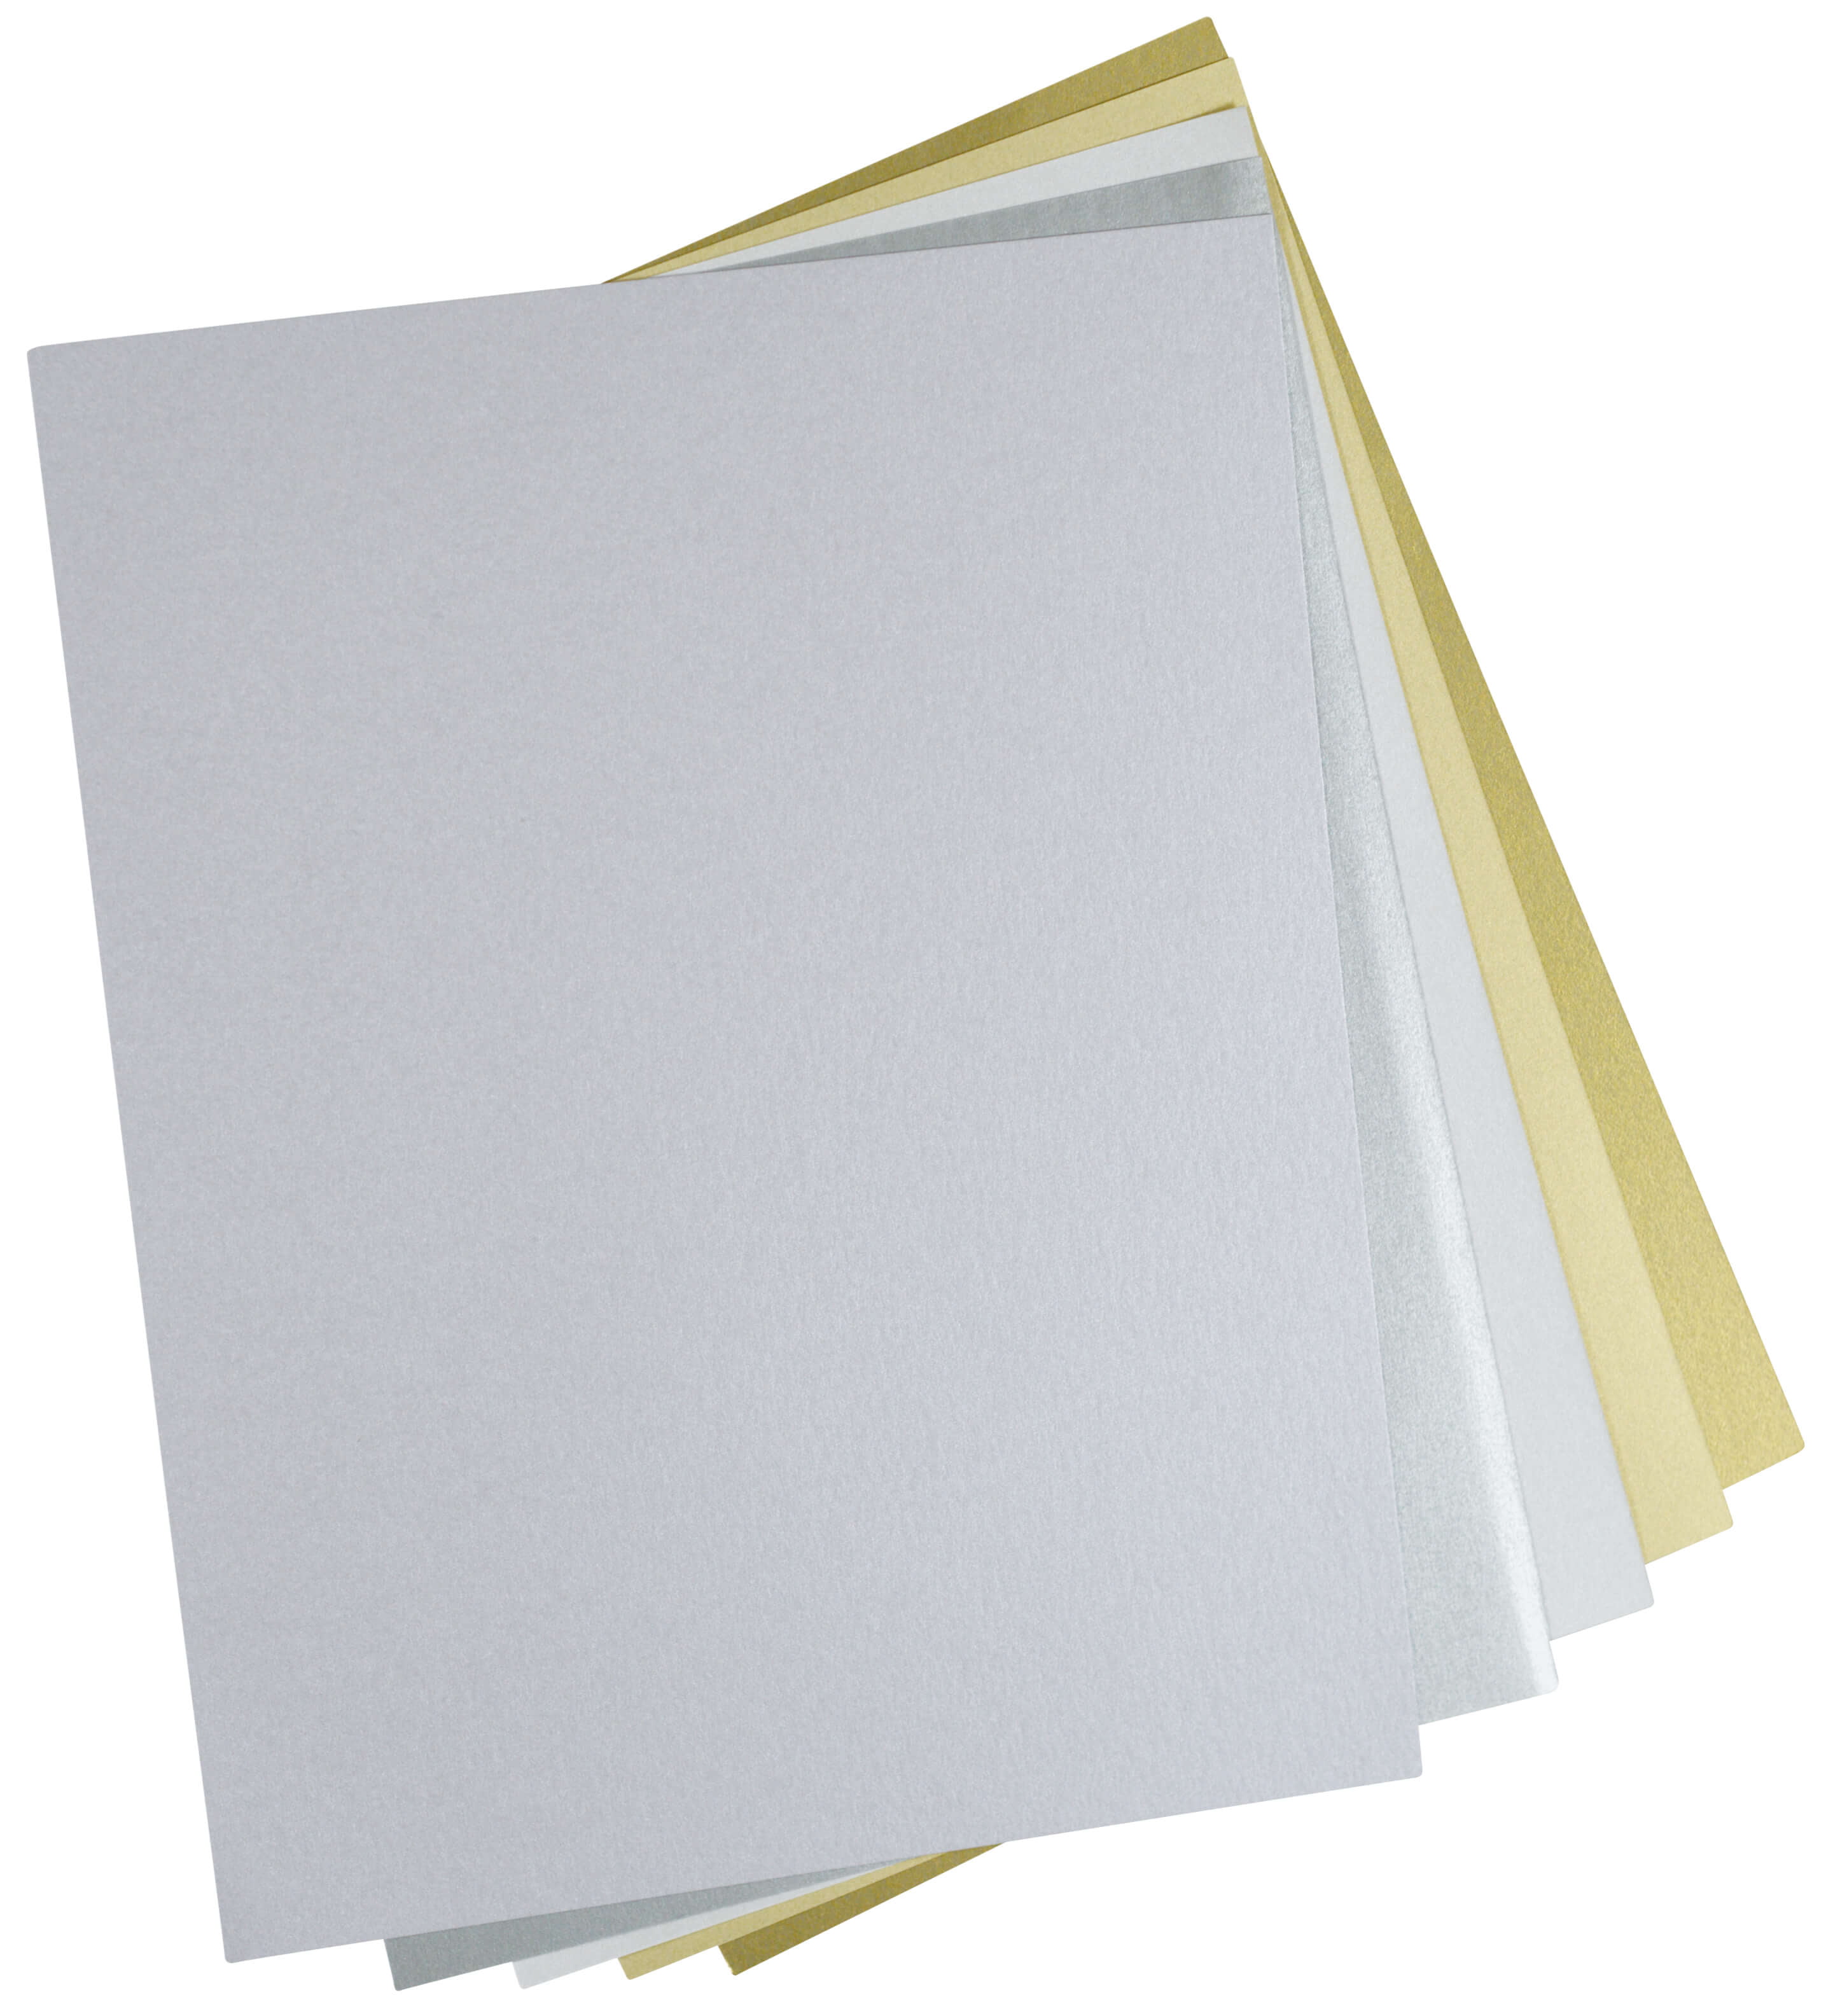 32/80lb Text Professionals Designers PaperPapers Legal Size Everyday Paper Shimmer Off-White Champagne 8-1/2-x-14 Lightweight Multi-use Paper 200-pk 118 GSM Crafters and DIY Projects 